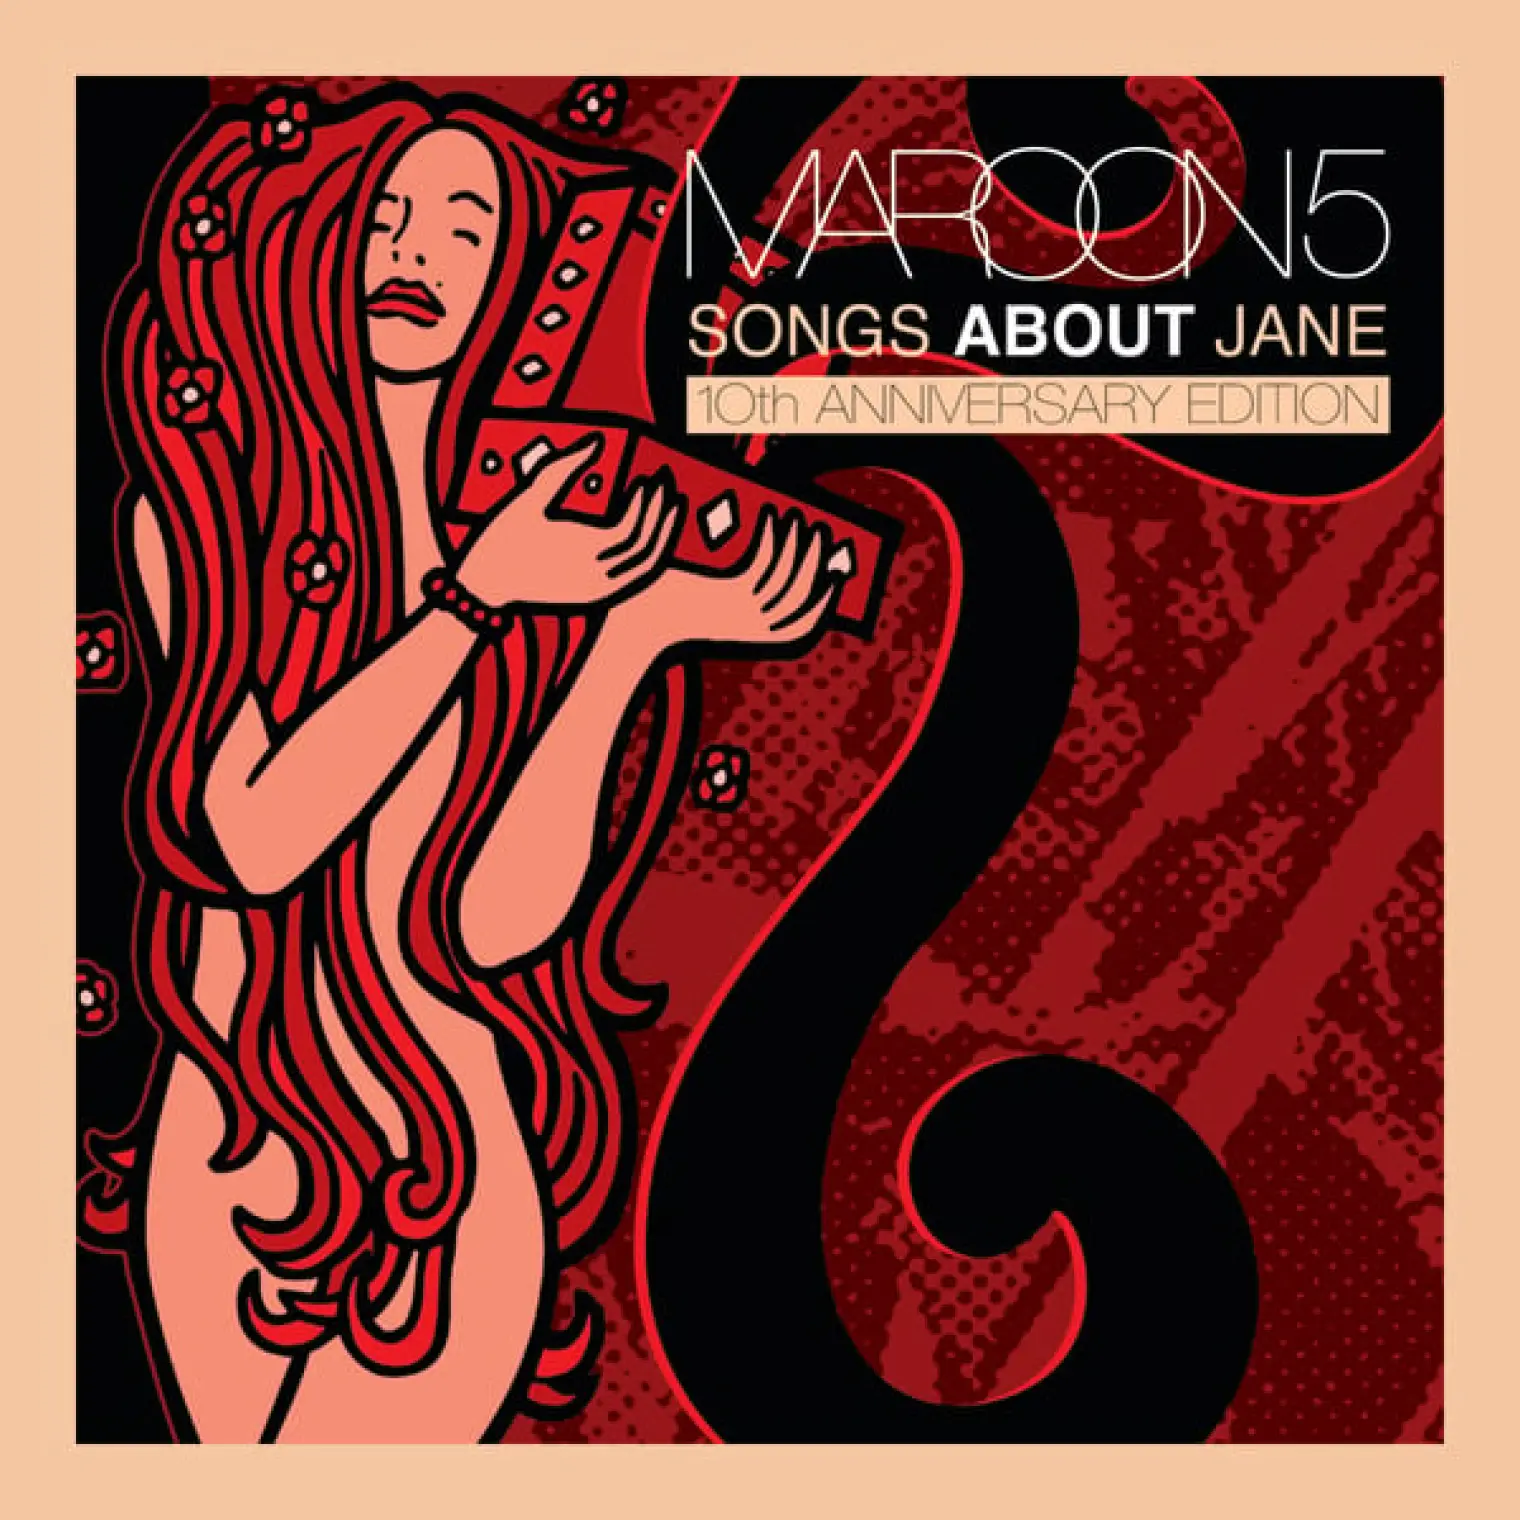 Songs About Jane: 10th Anniversary Edition -  Maroon 5 